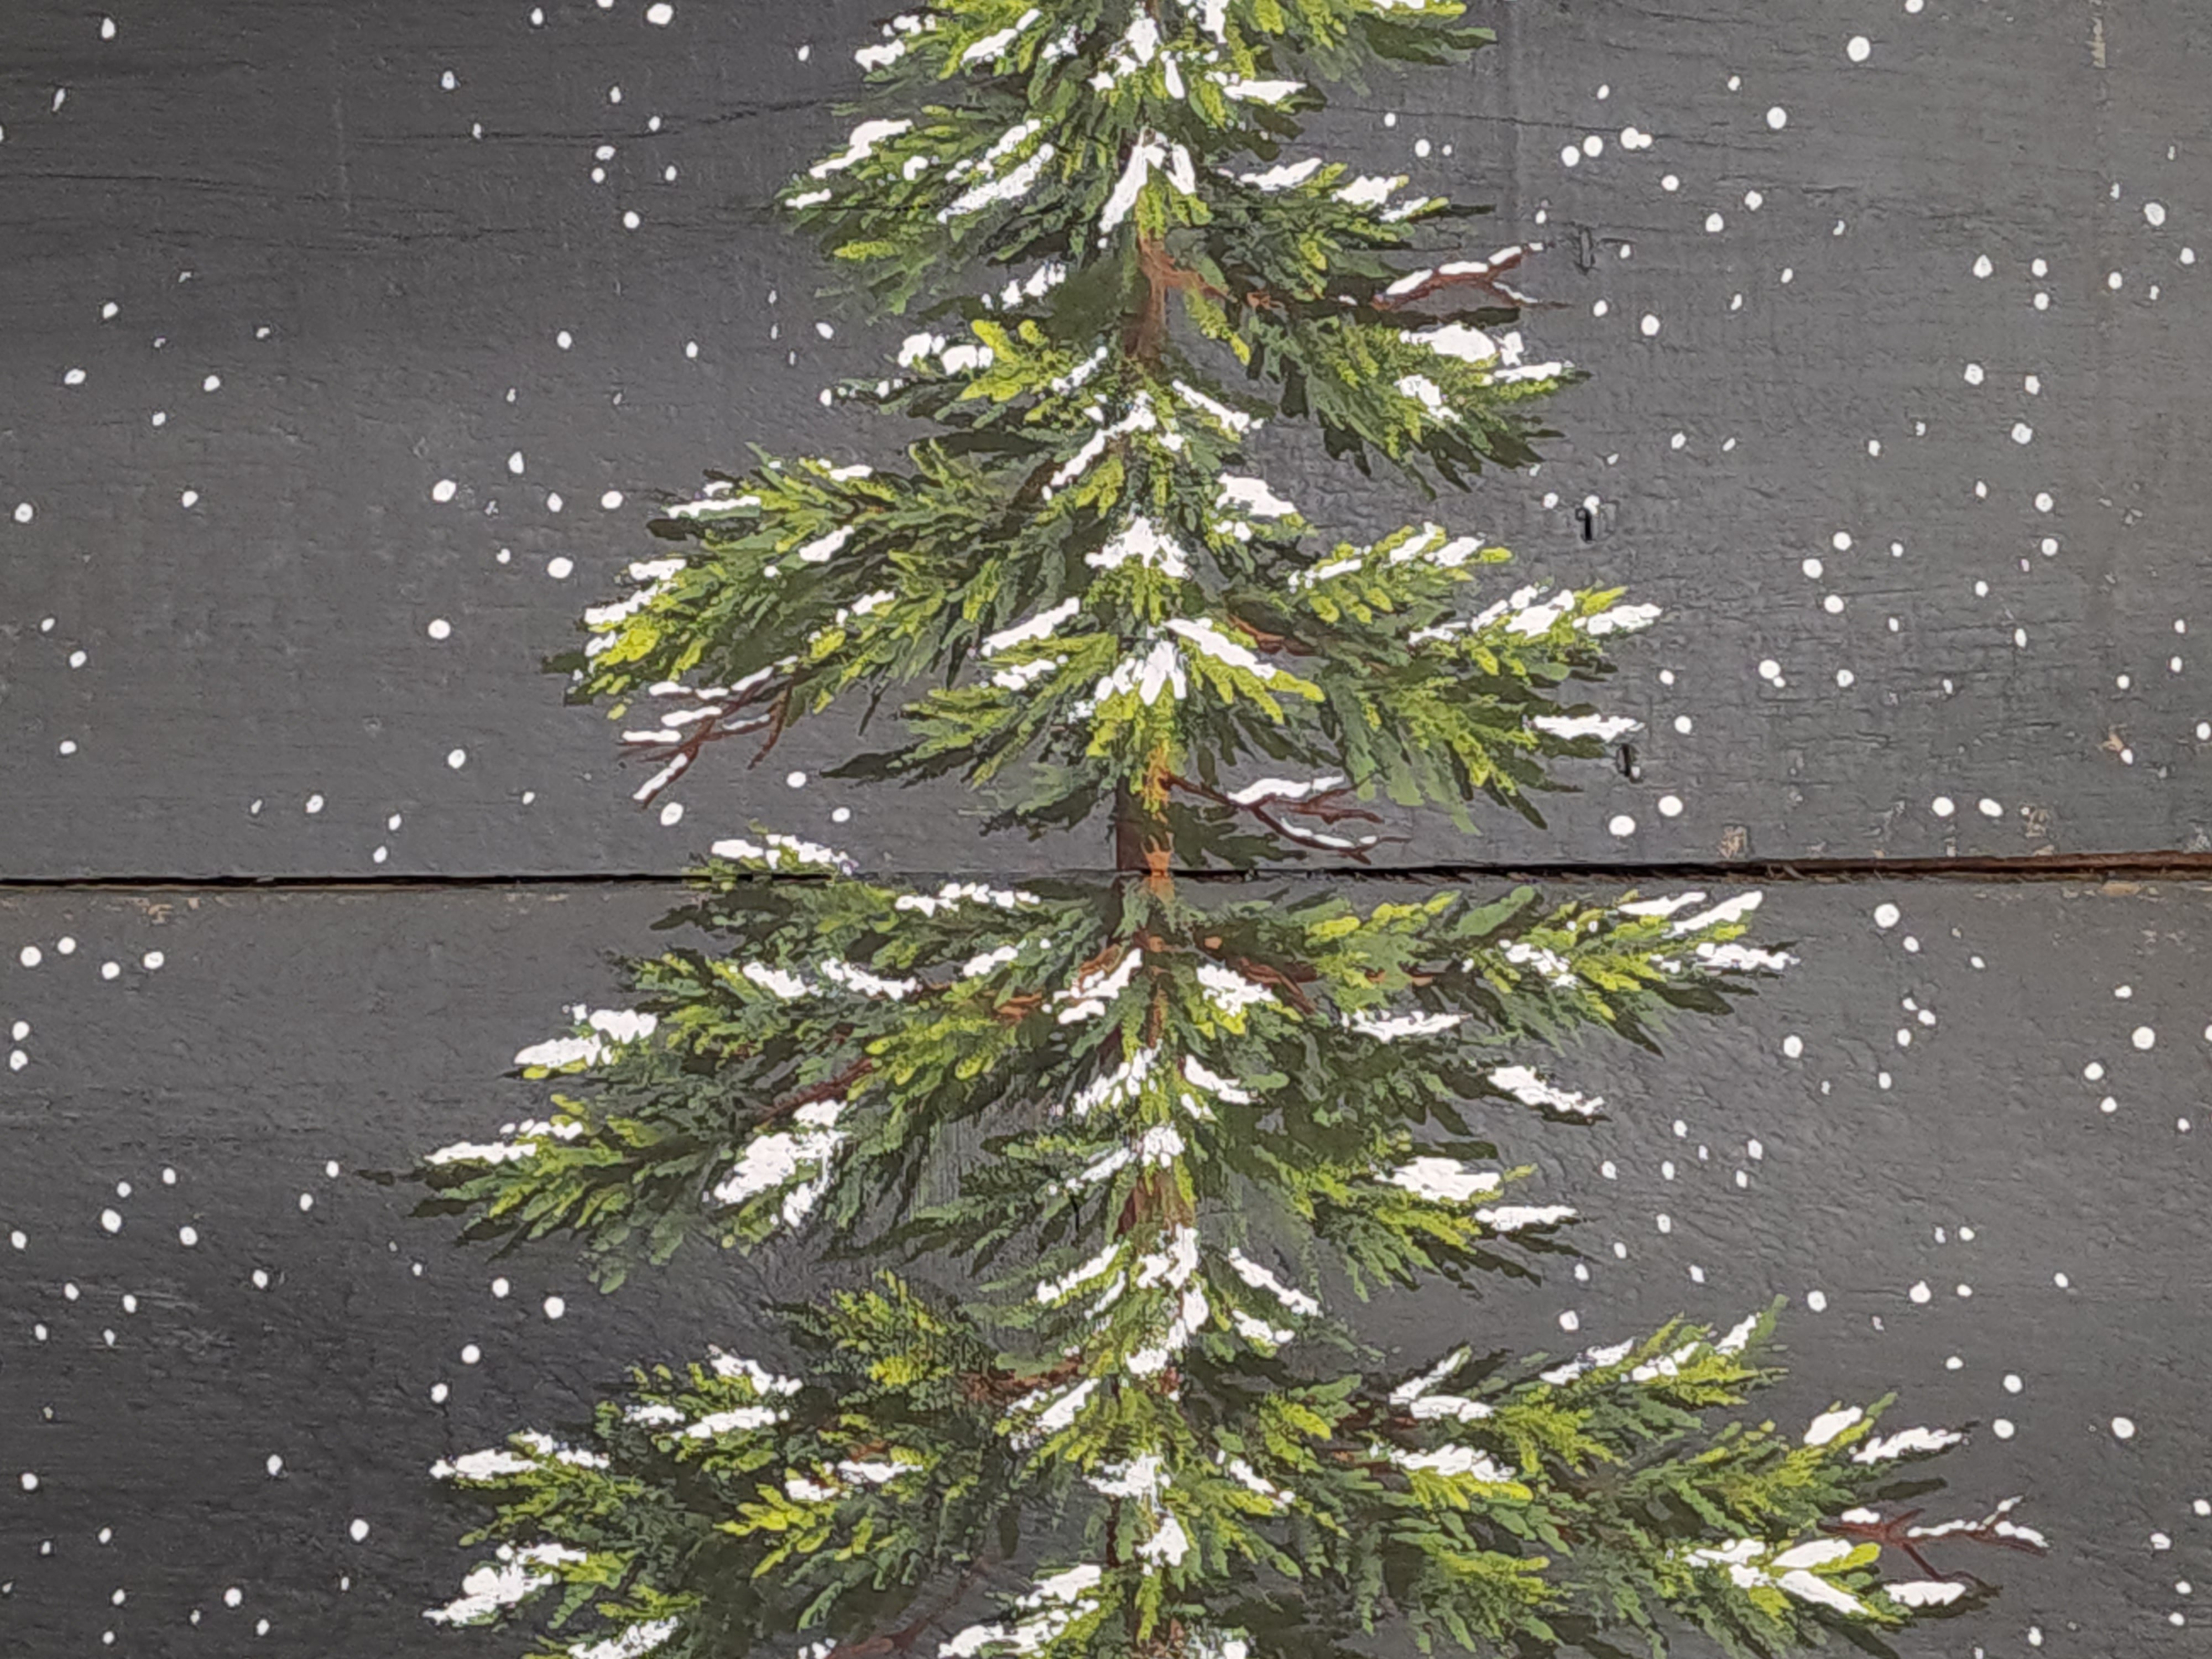 Winter snow falling on Christmas pine tree painting on pallet wood, Let it snow word winter sign, hand painted evergreen tree